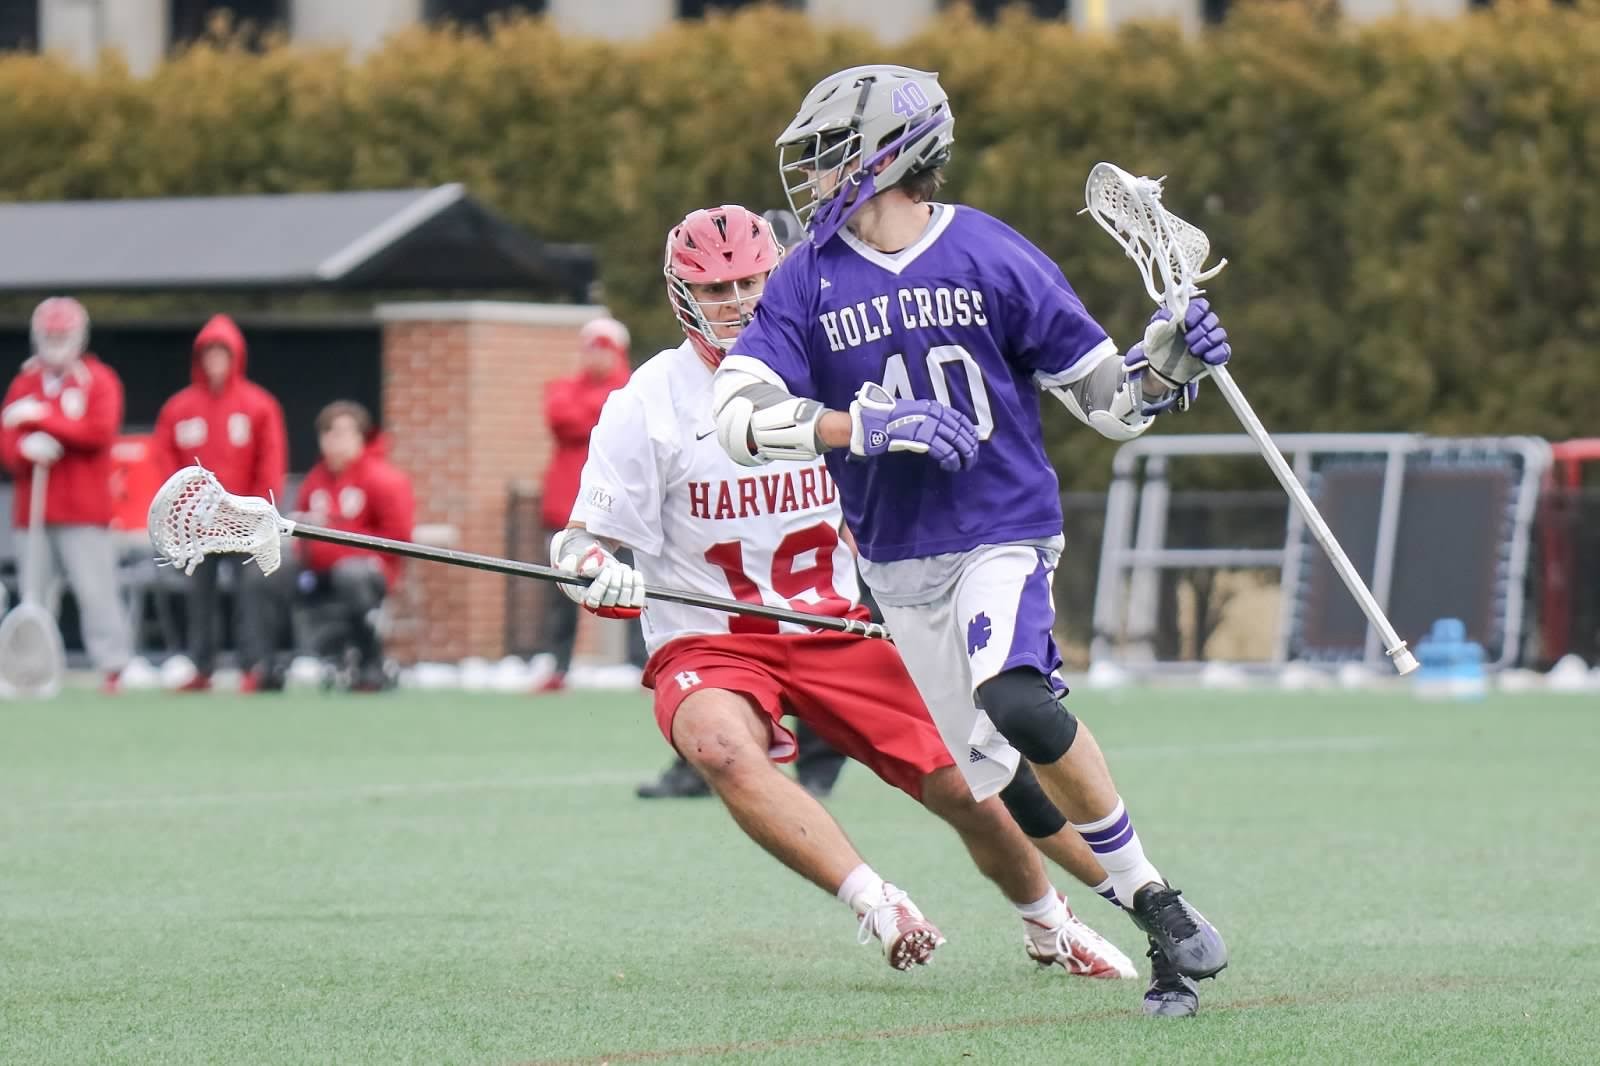 Holy Cross senior midfielder Connor Sofield is one of several Long Beach High School alums competing at the highest level of college lacrosse.